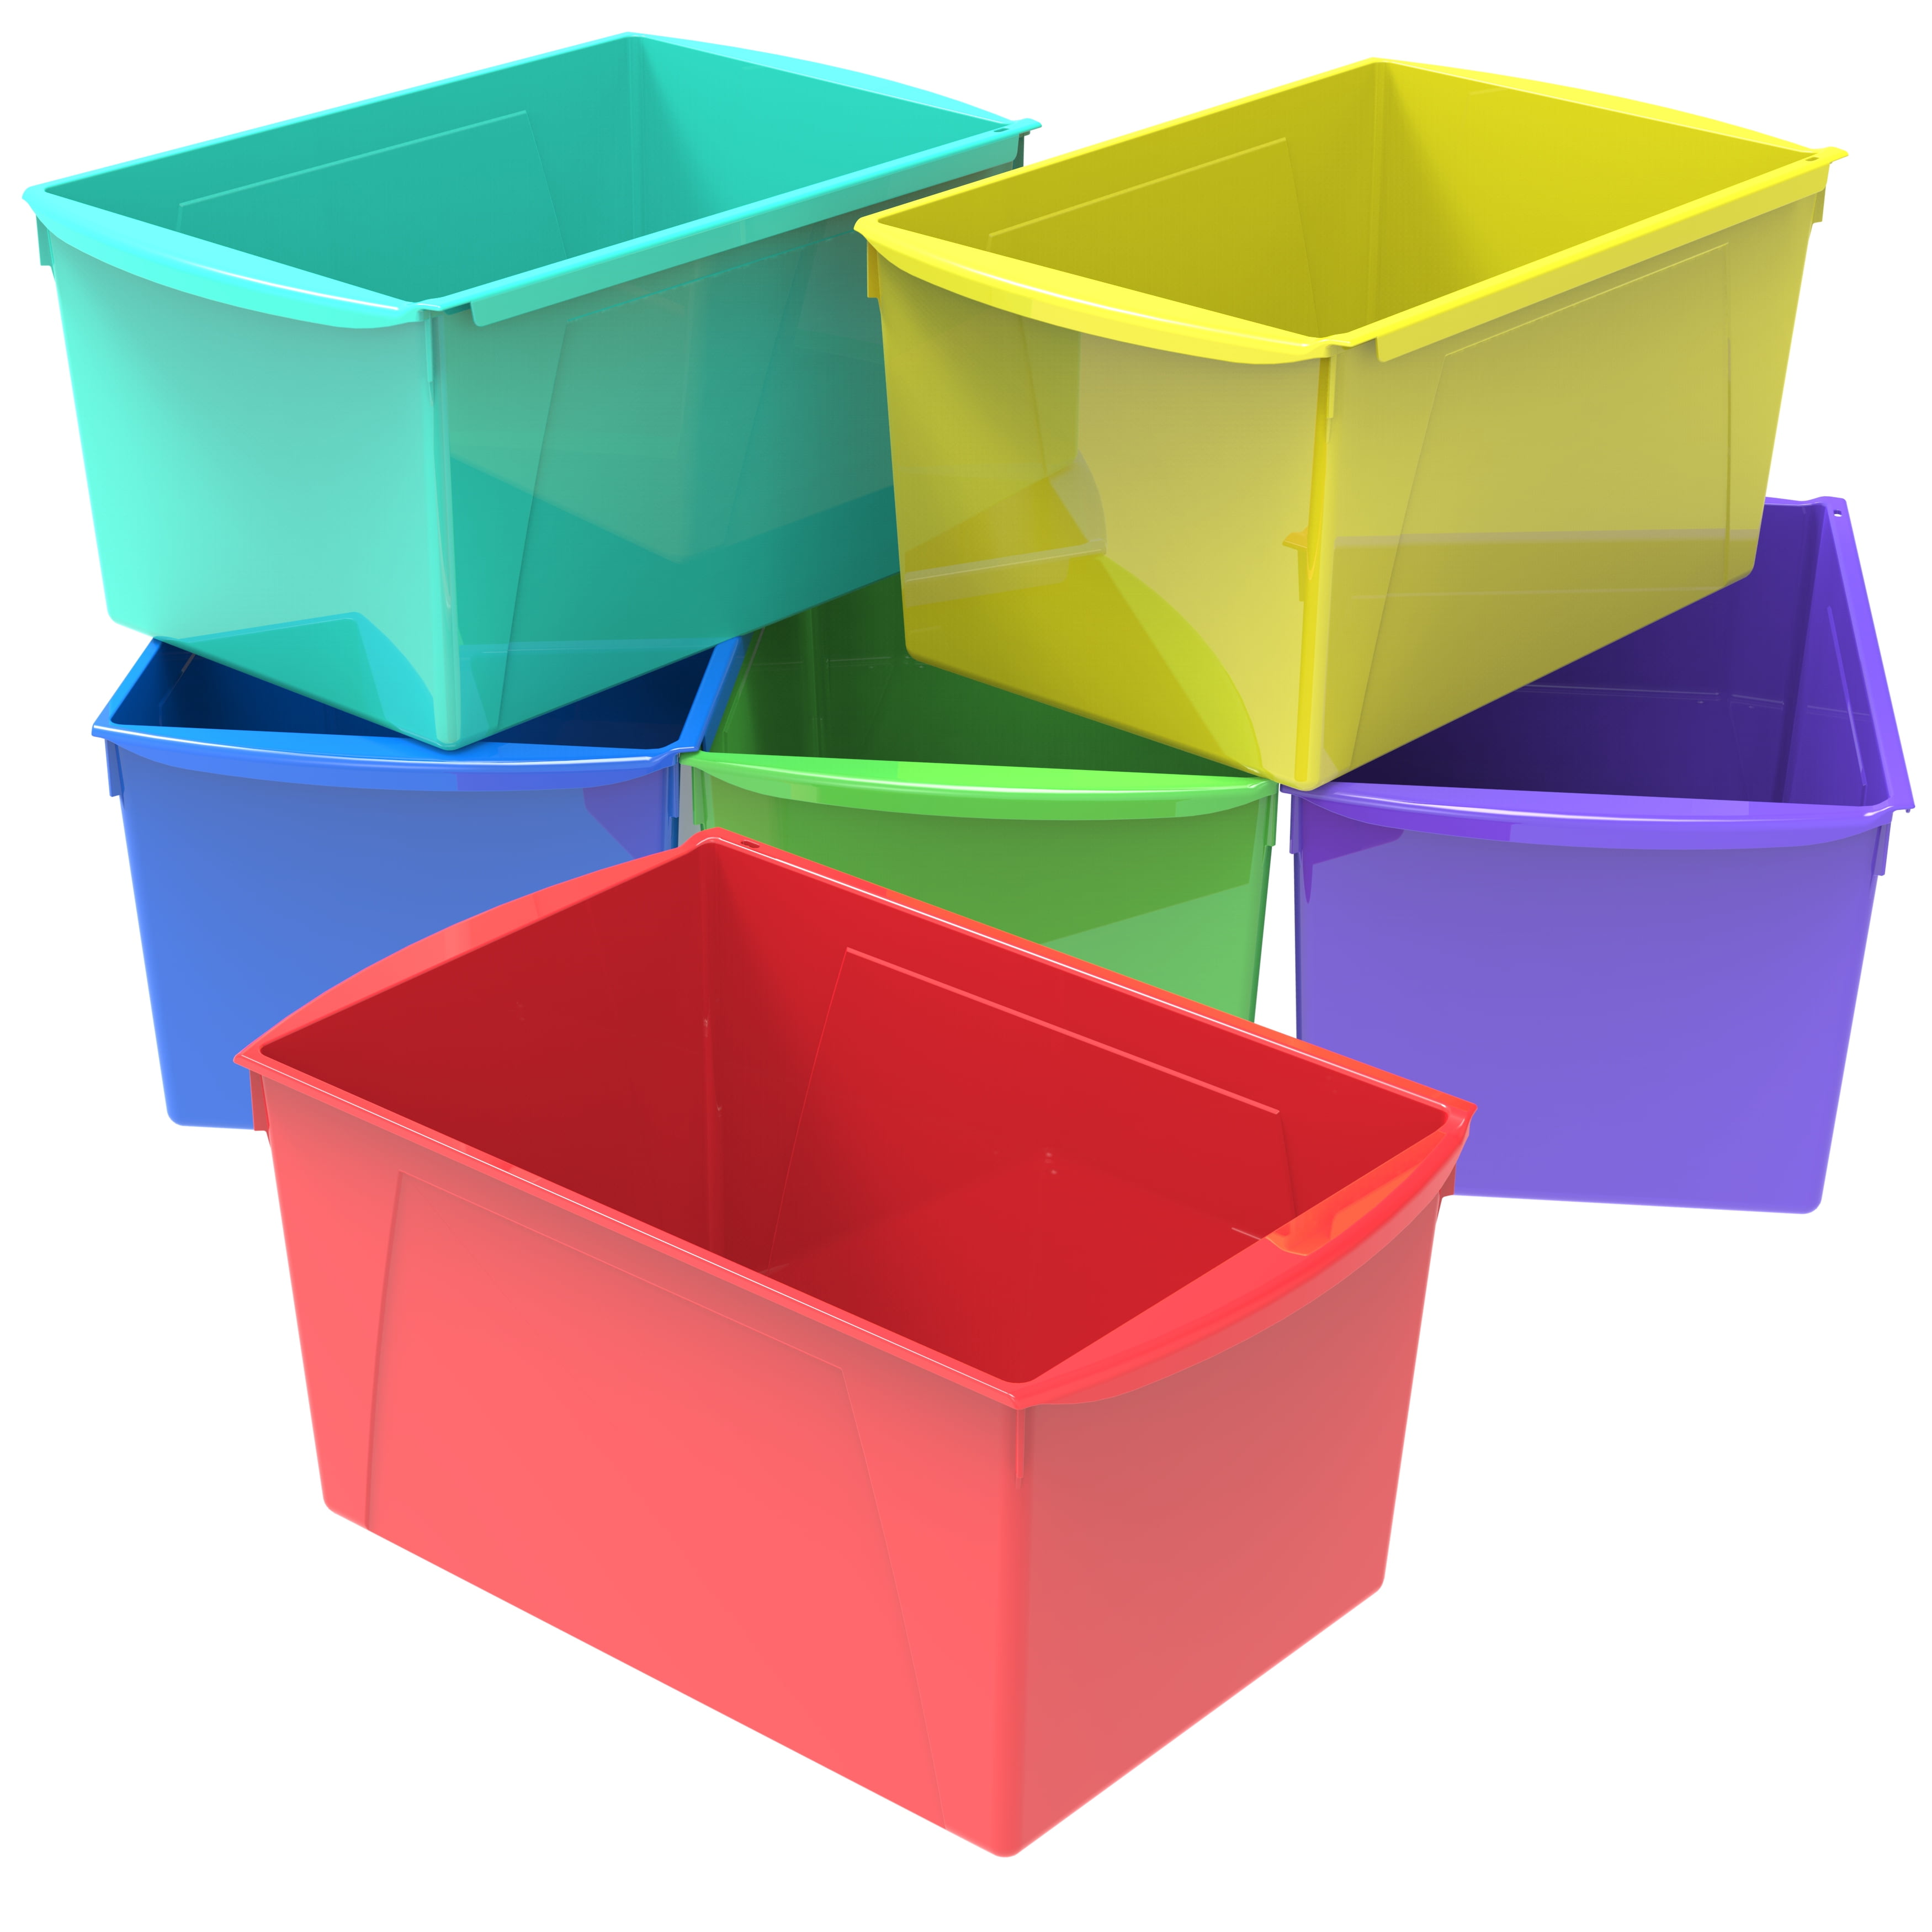 Bright Creations 12 Pack Colorful Plastic Classroom Storage Bins